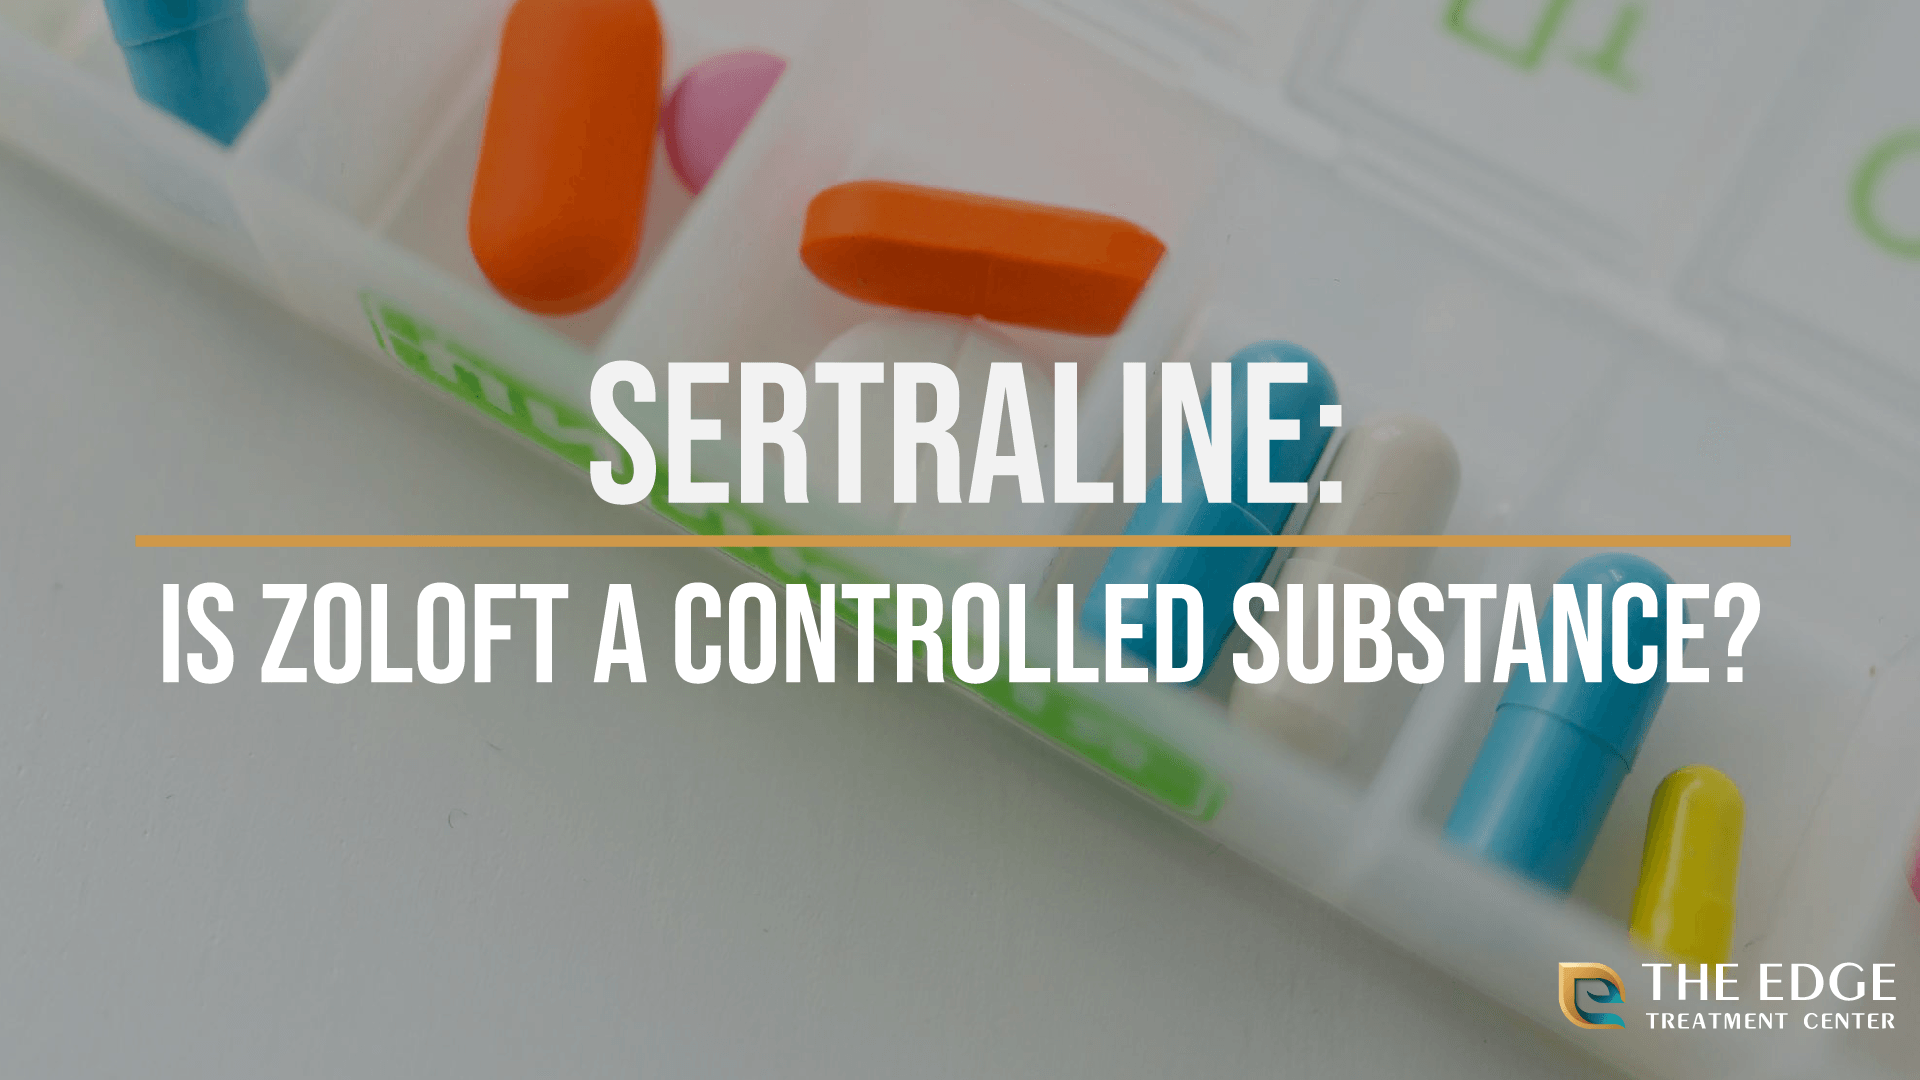 Is Sertraline a Controlled Substance?